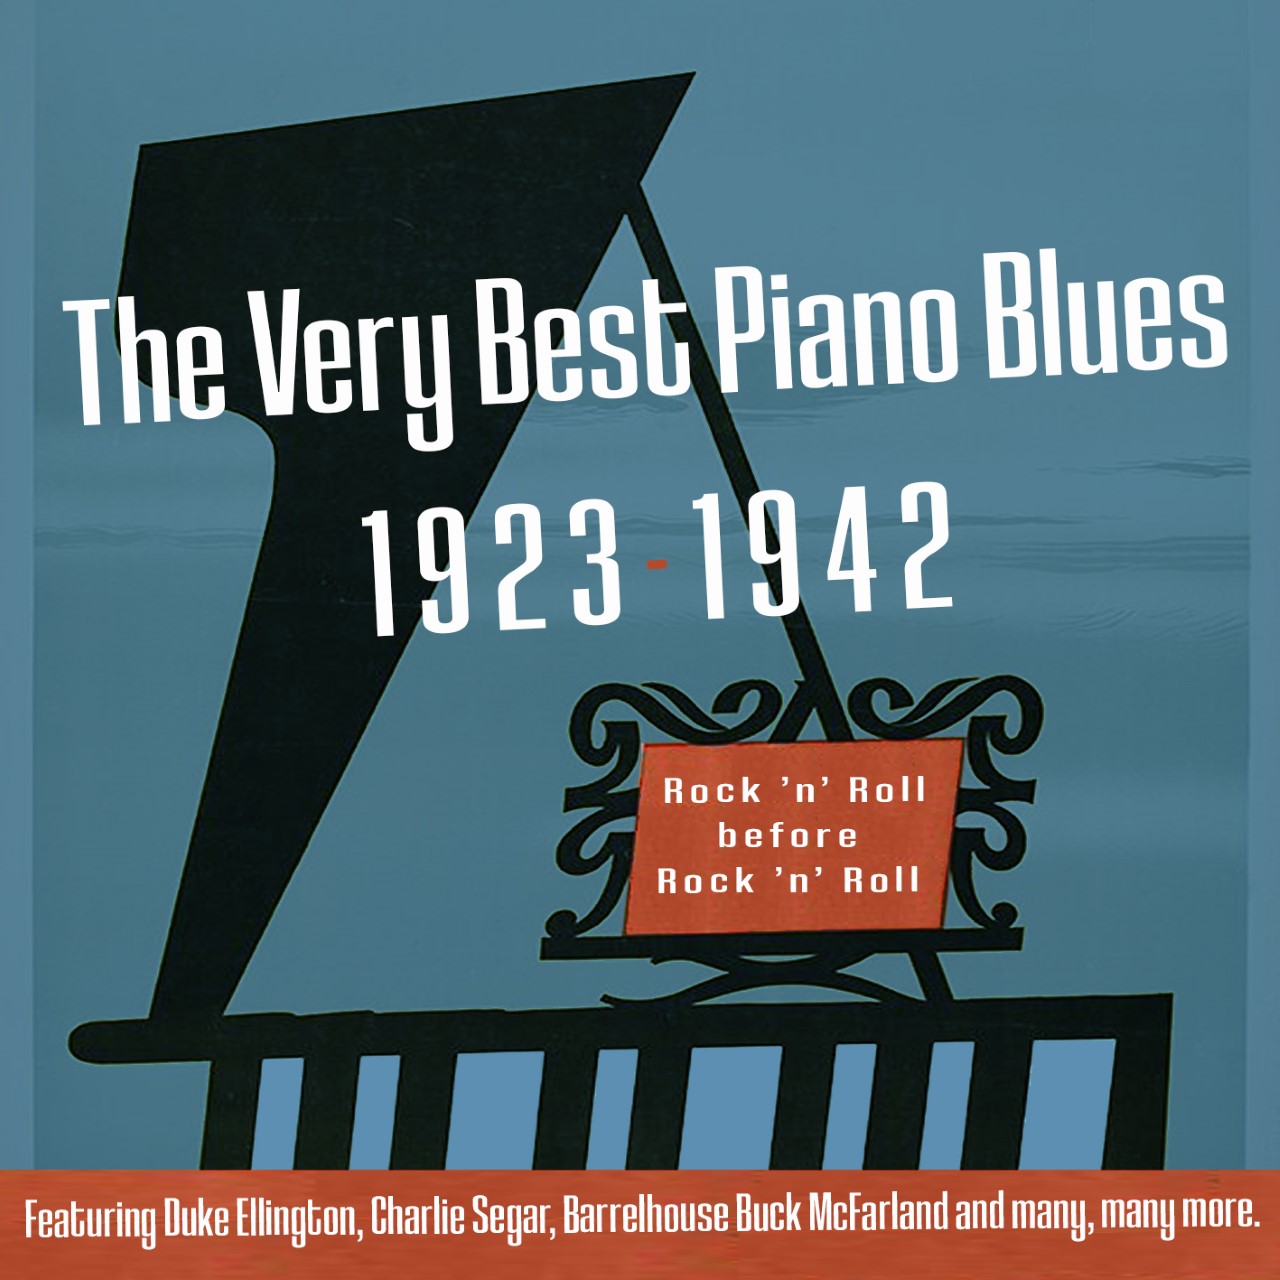 The Very Best of Piano Blues 1923 – 1942